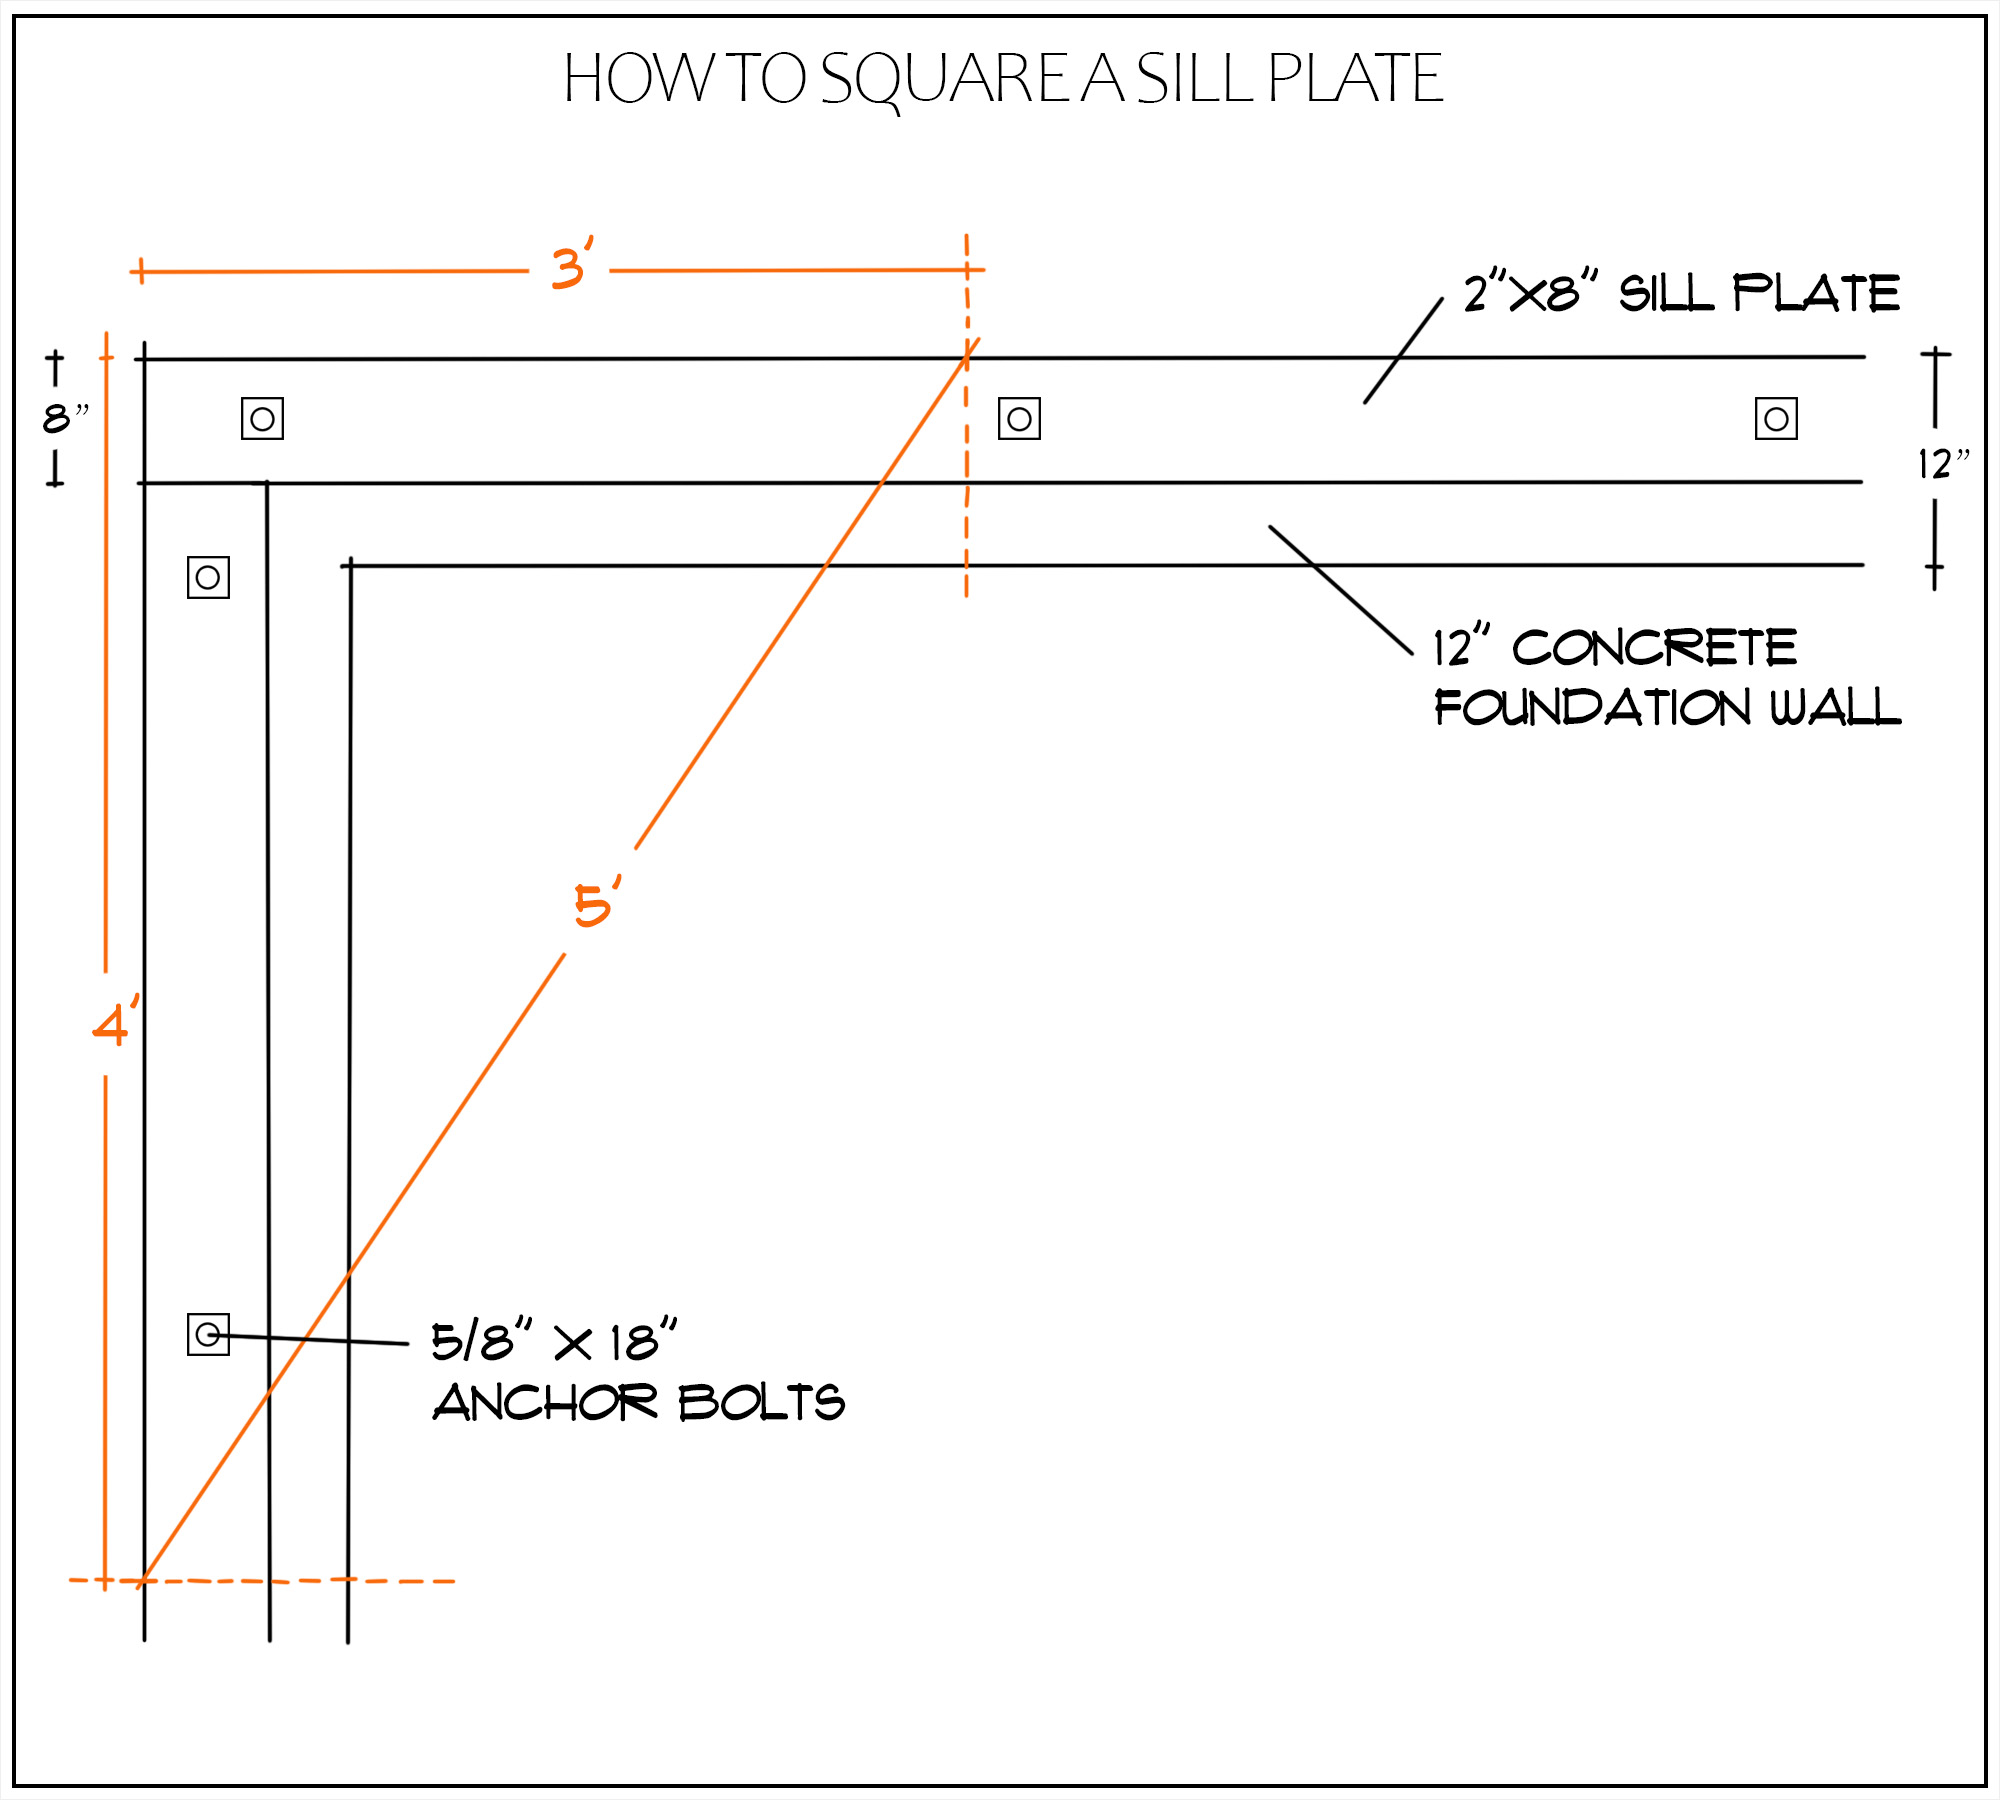 How to square a sill plate infographic 1